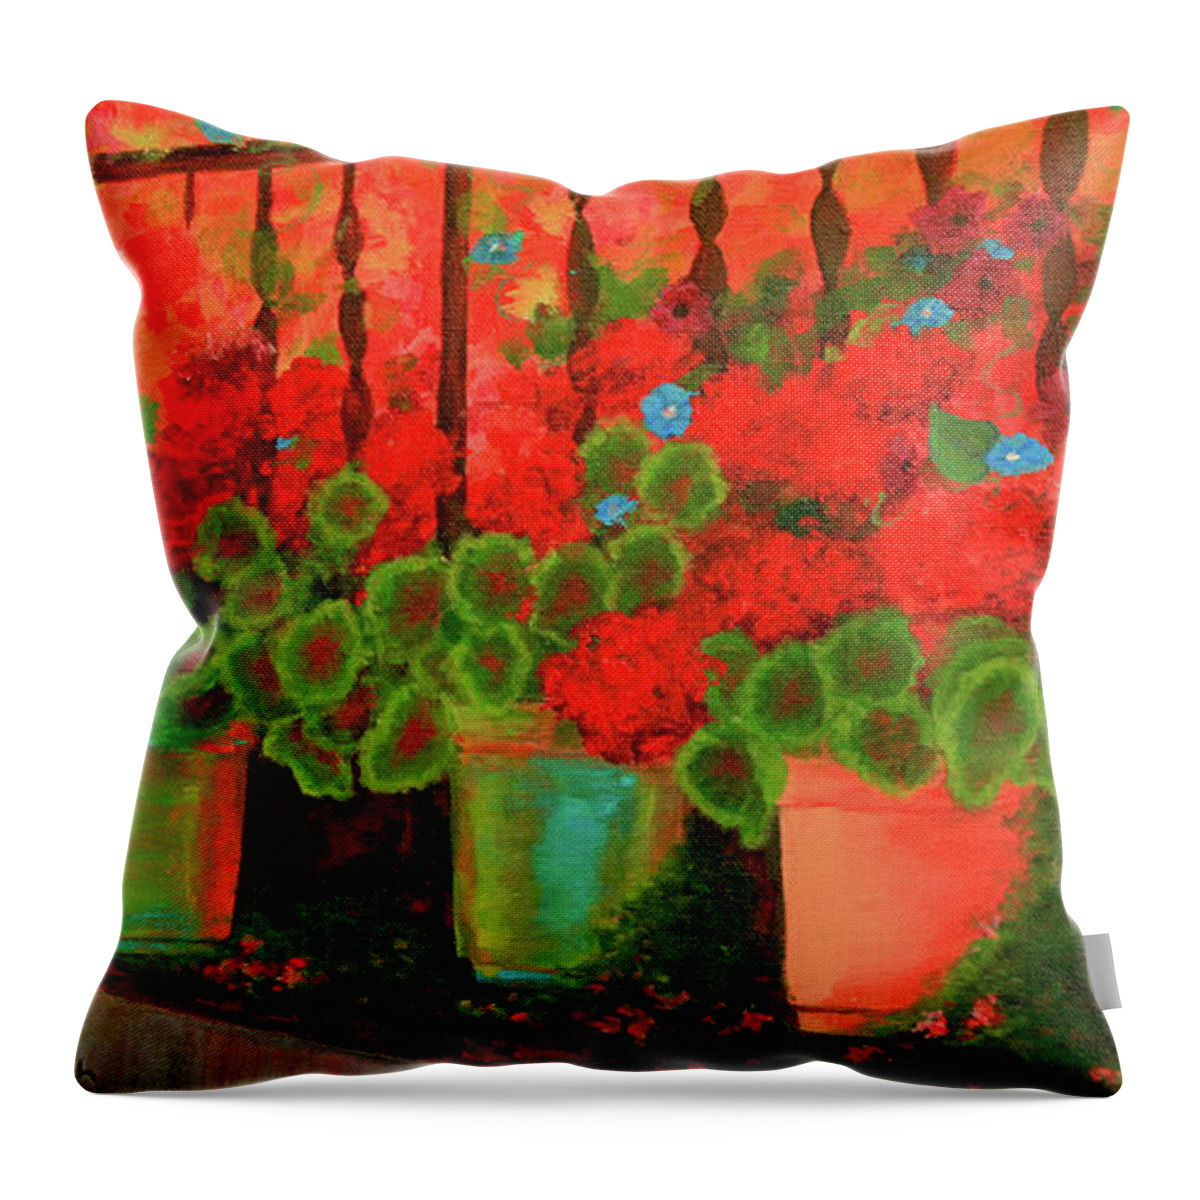 Acrylic Throw Pillow featuring the painting Summer Blooms by Jeanette French